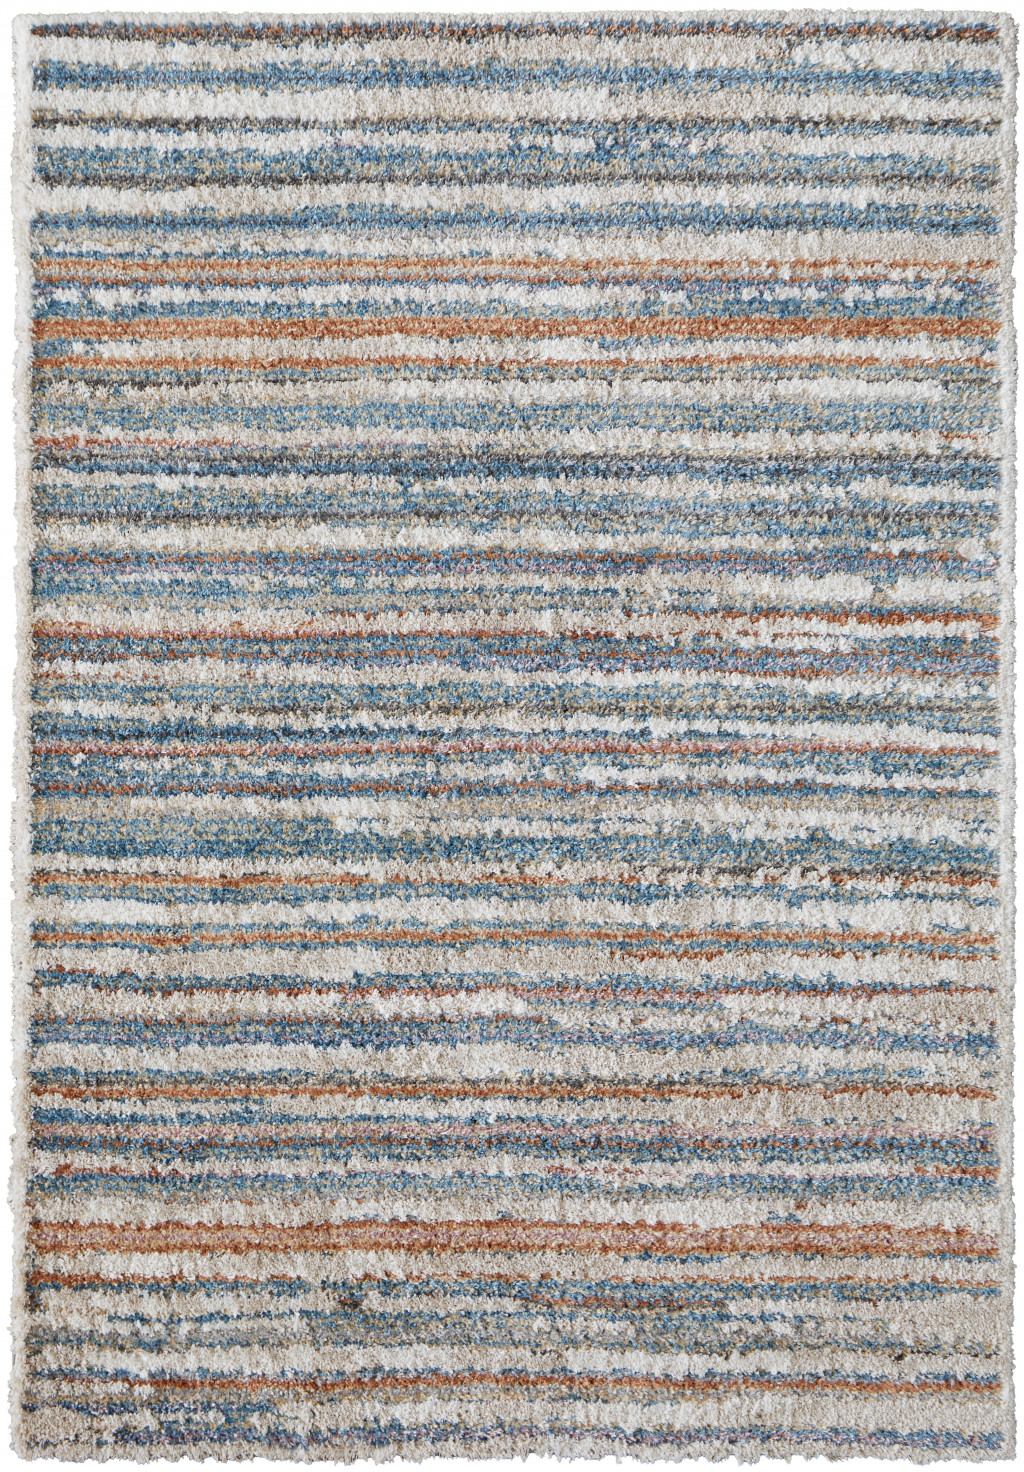 5' X 8' Ivory Blue And Orange Striped Power Loom Stain Resistant Area Rug-514528-1